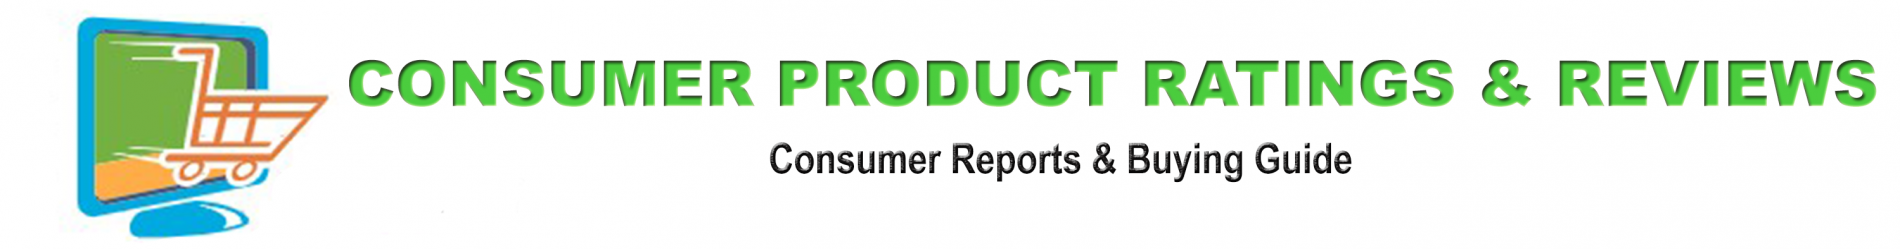 Consumer Reports – Product Reviews, Ratings & Buying Guide